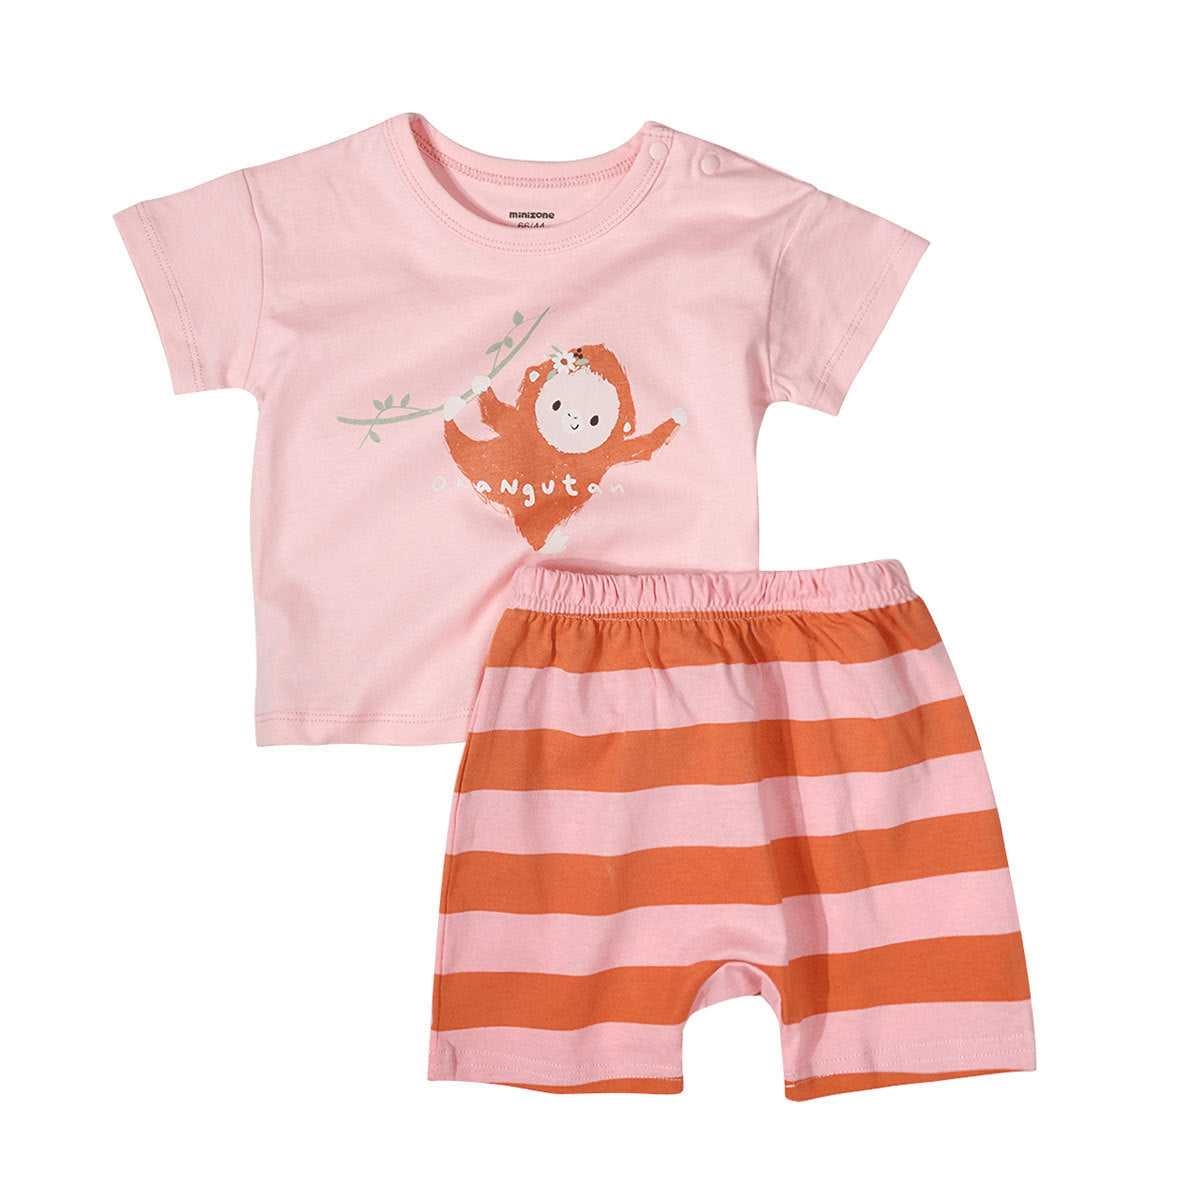 Western Style Baby Cotton Short-sleeved T-shirt Shorts Loose Suit